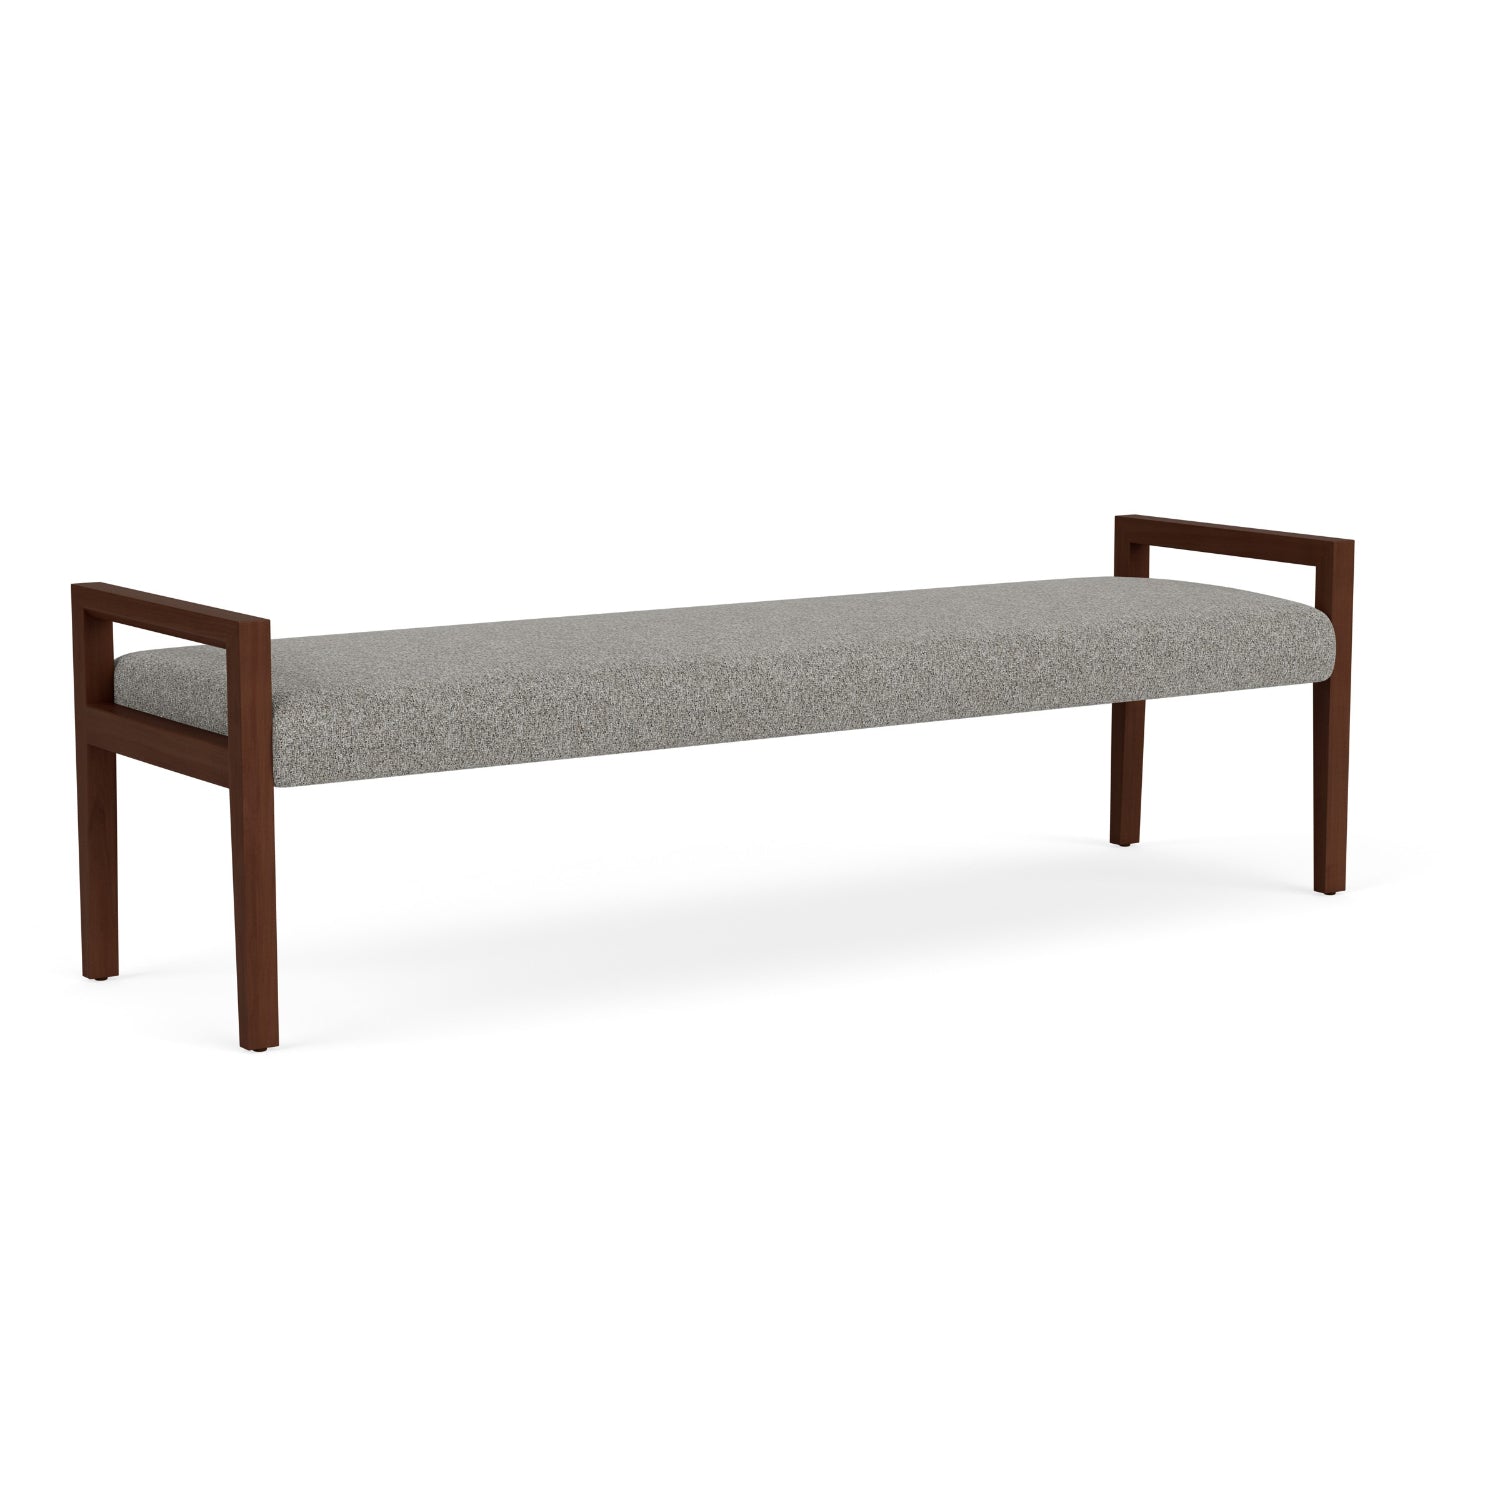 Brooklyn Collection Reception Seating, 3 Seat Bench, Standard Fabric Upholstery, FREE SHIPPING